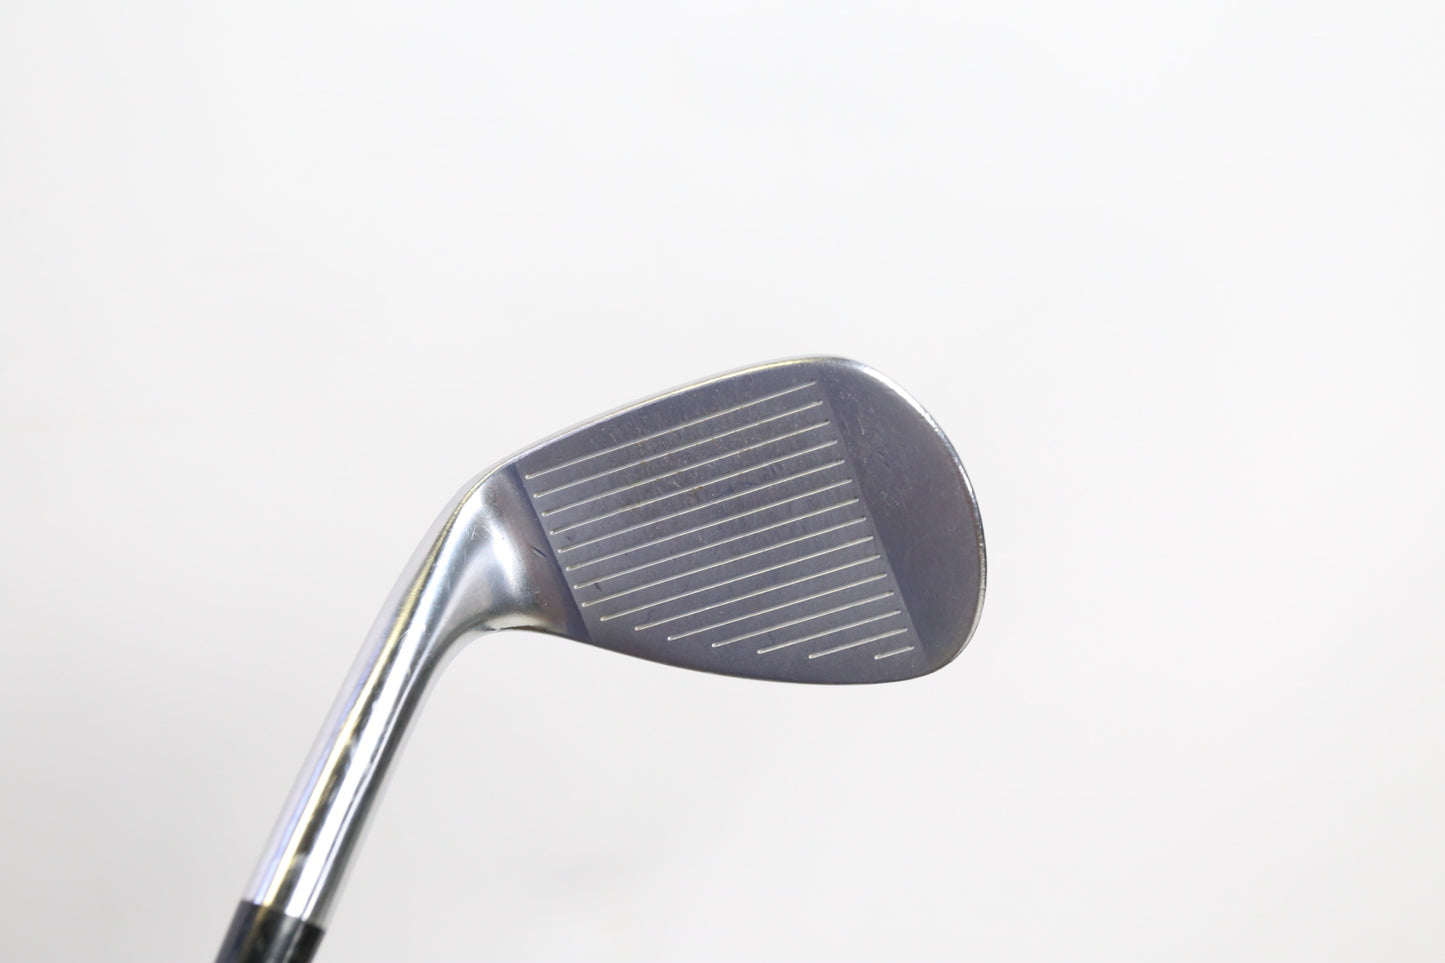 Used Miura Tour Series Sand Wedge - Right-Handed - 54 Degrees - Regular Flex